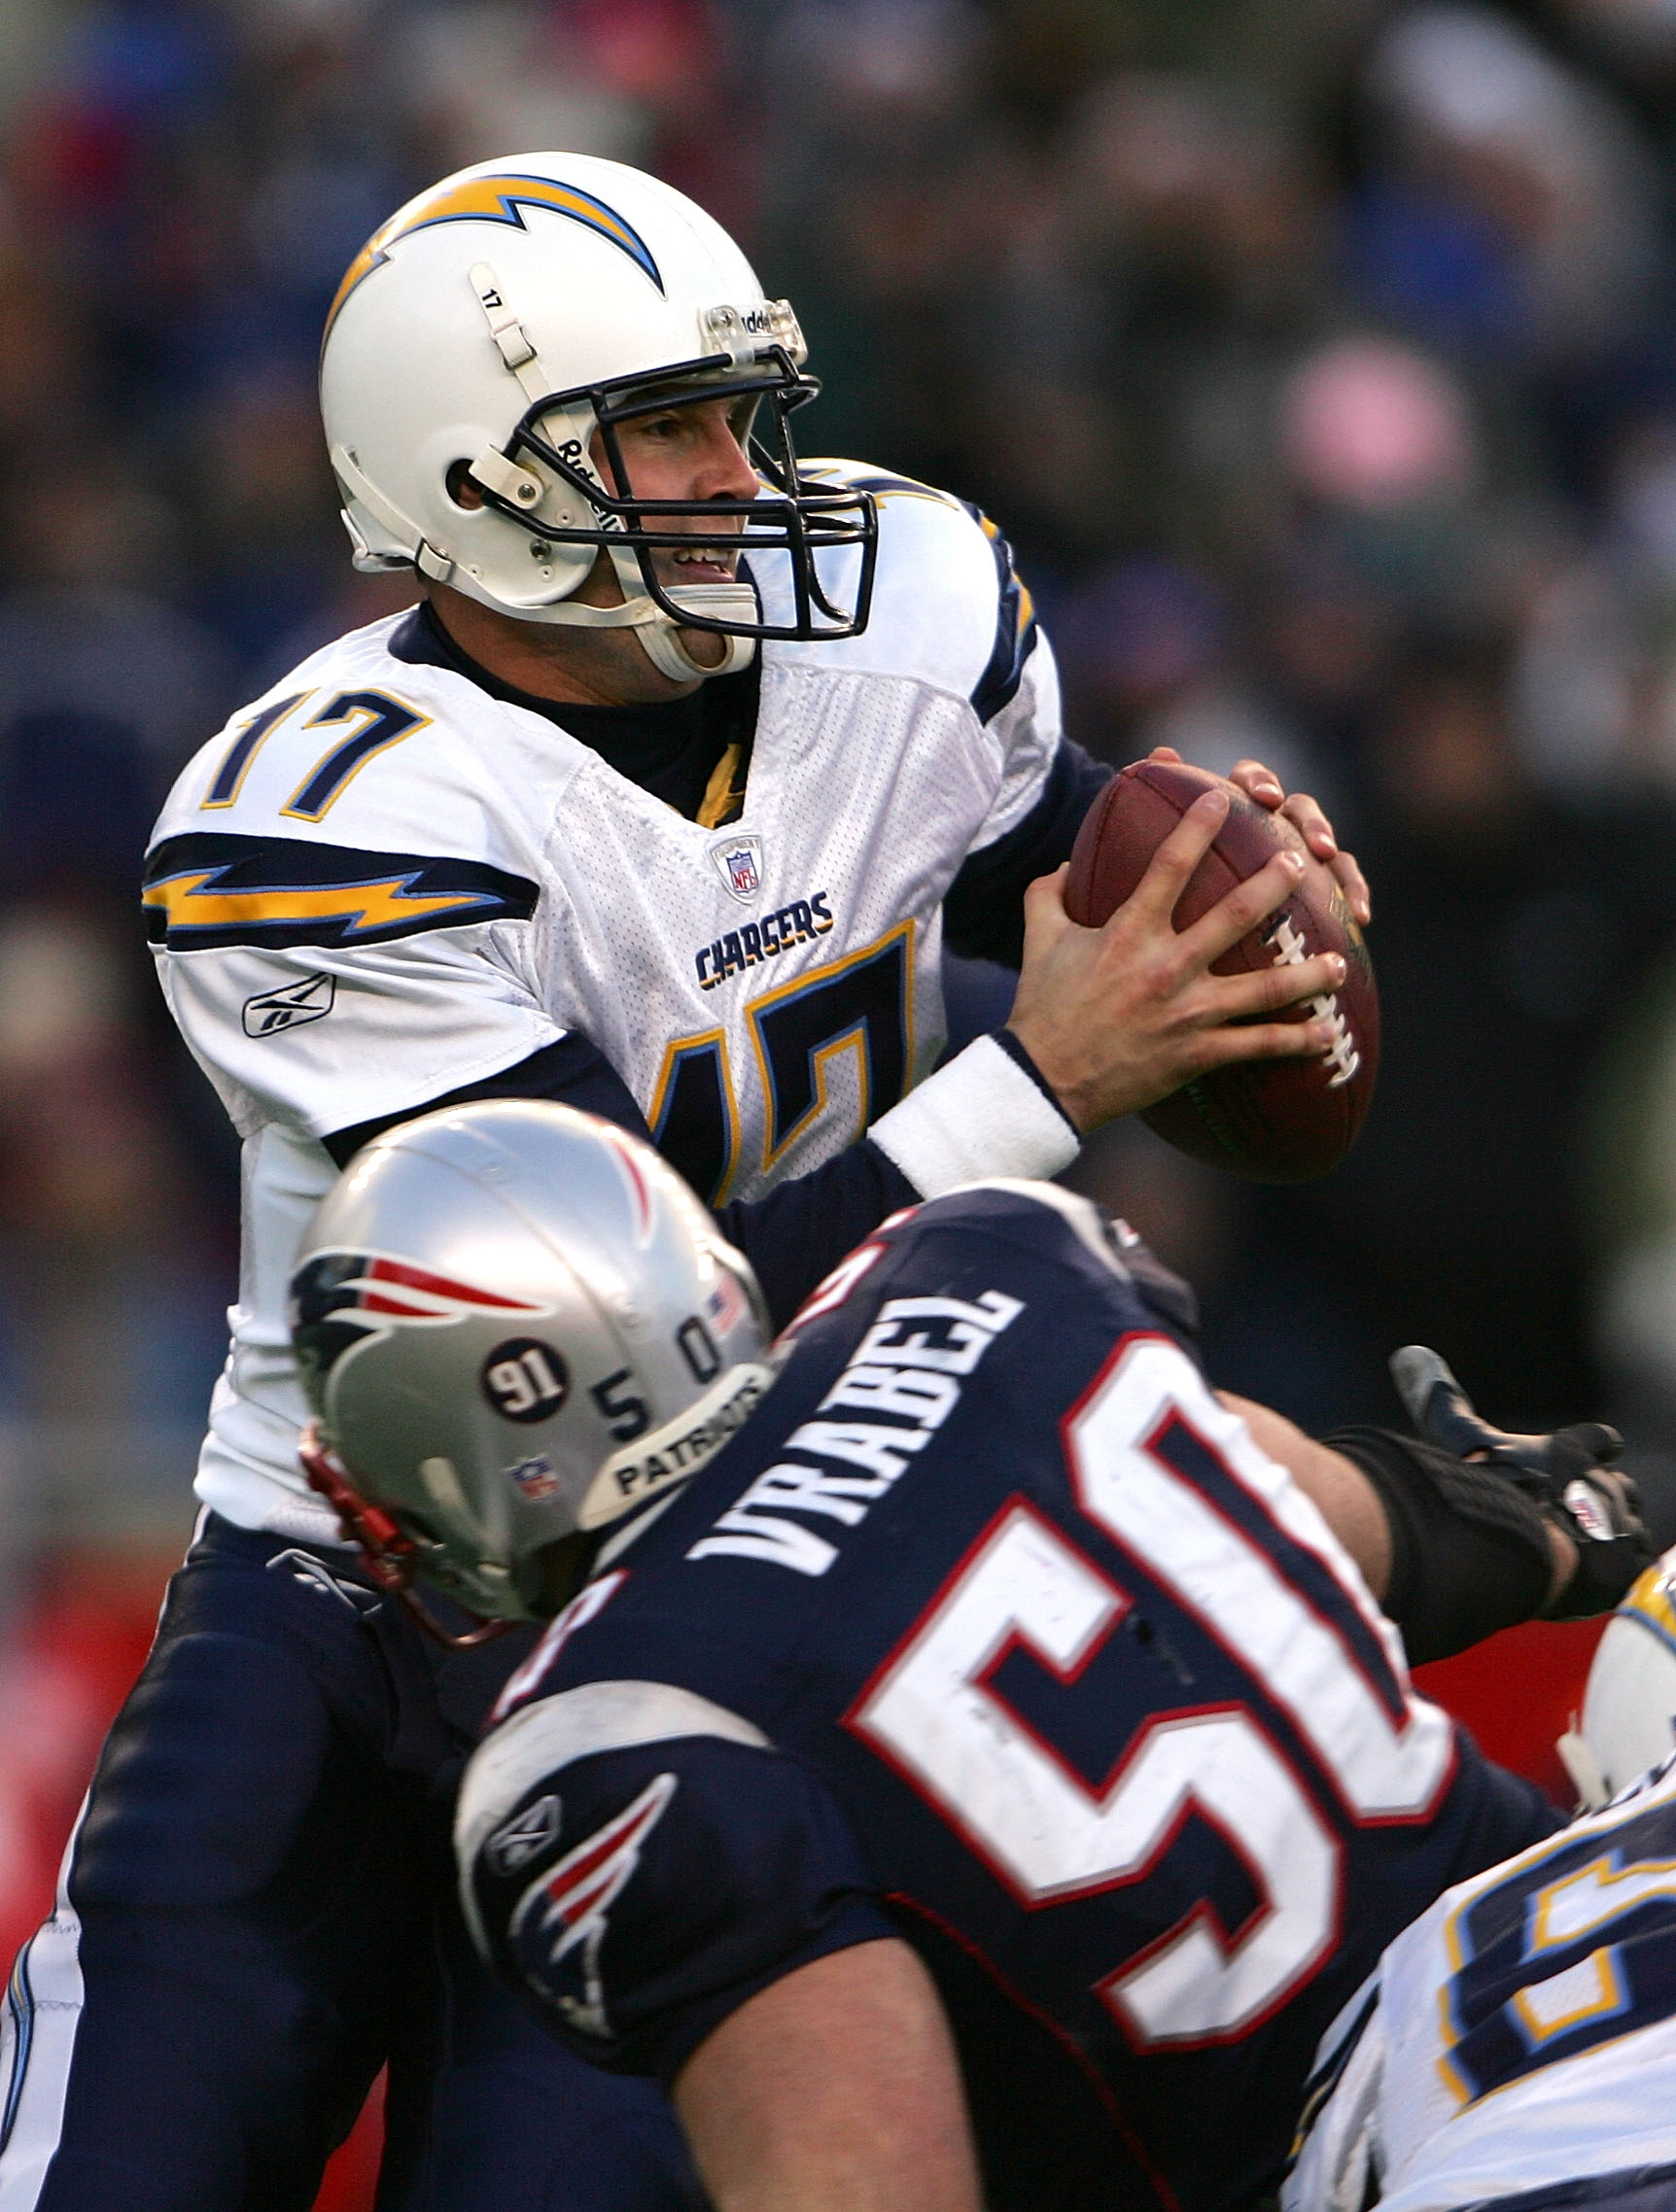 FOXBORO, MA - JANUARY 20: Philip Rivers #17 of the San Diego Chargers looks to pass under pressure from Mike Vrabel #50 of the New England Patriots during the AFC Championship Game on January 20, 2008 at Gillette Stadium in Foxboro, Massachusetts. Chris McGrath/Getty Images